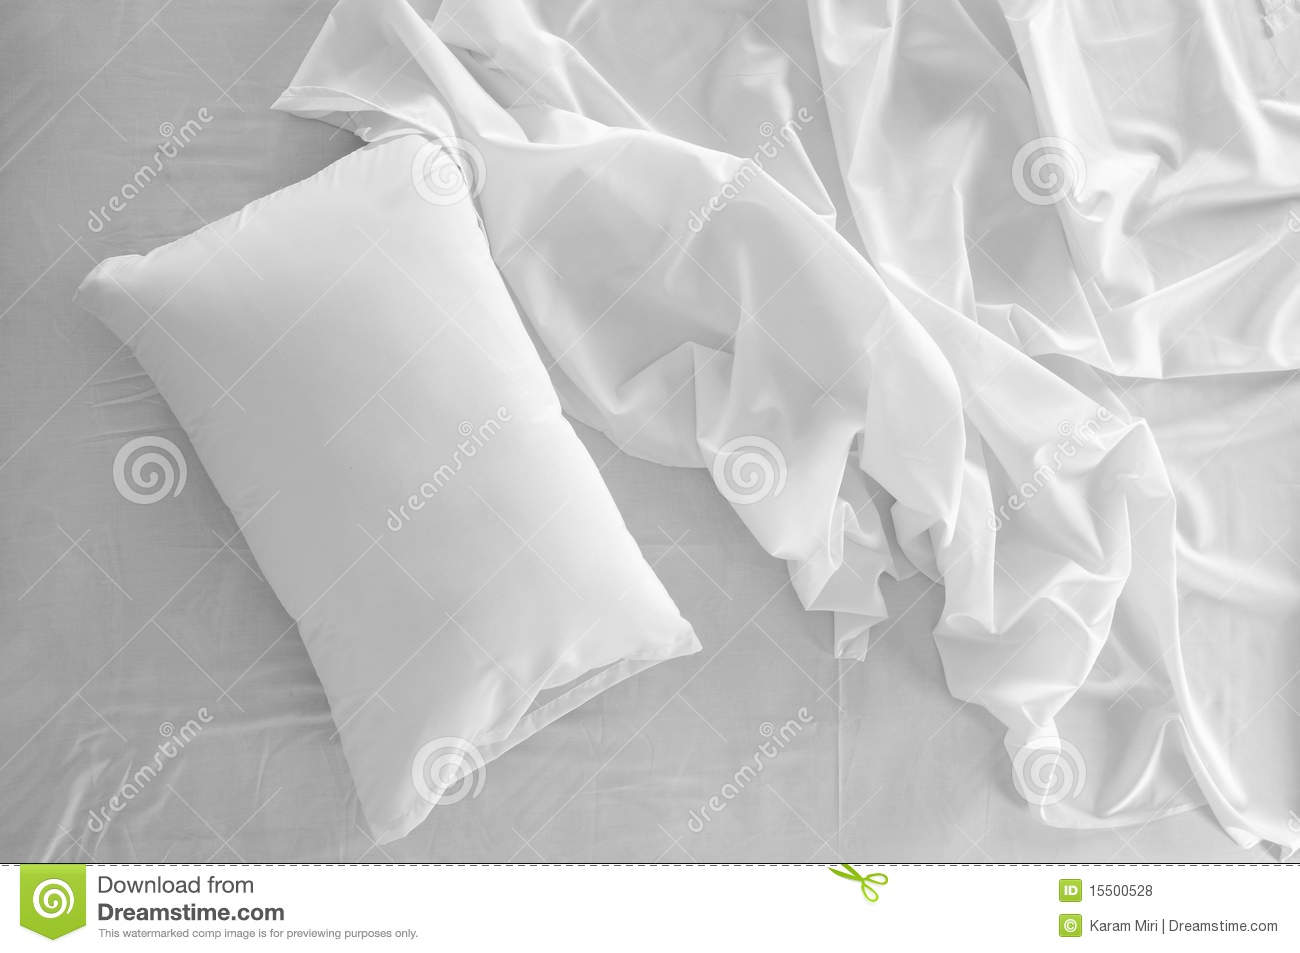 Messy Bed  Royalty Free Stock Photos   Image  15500528